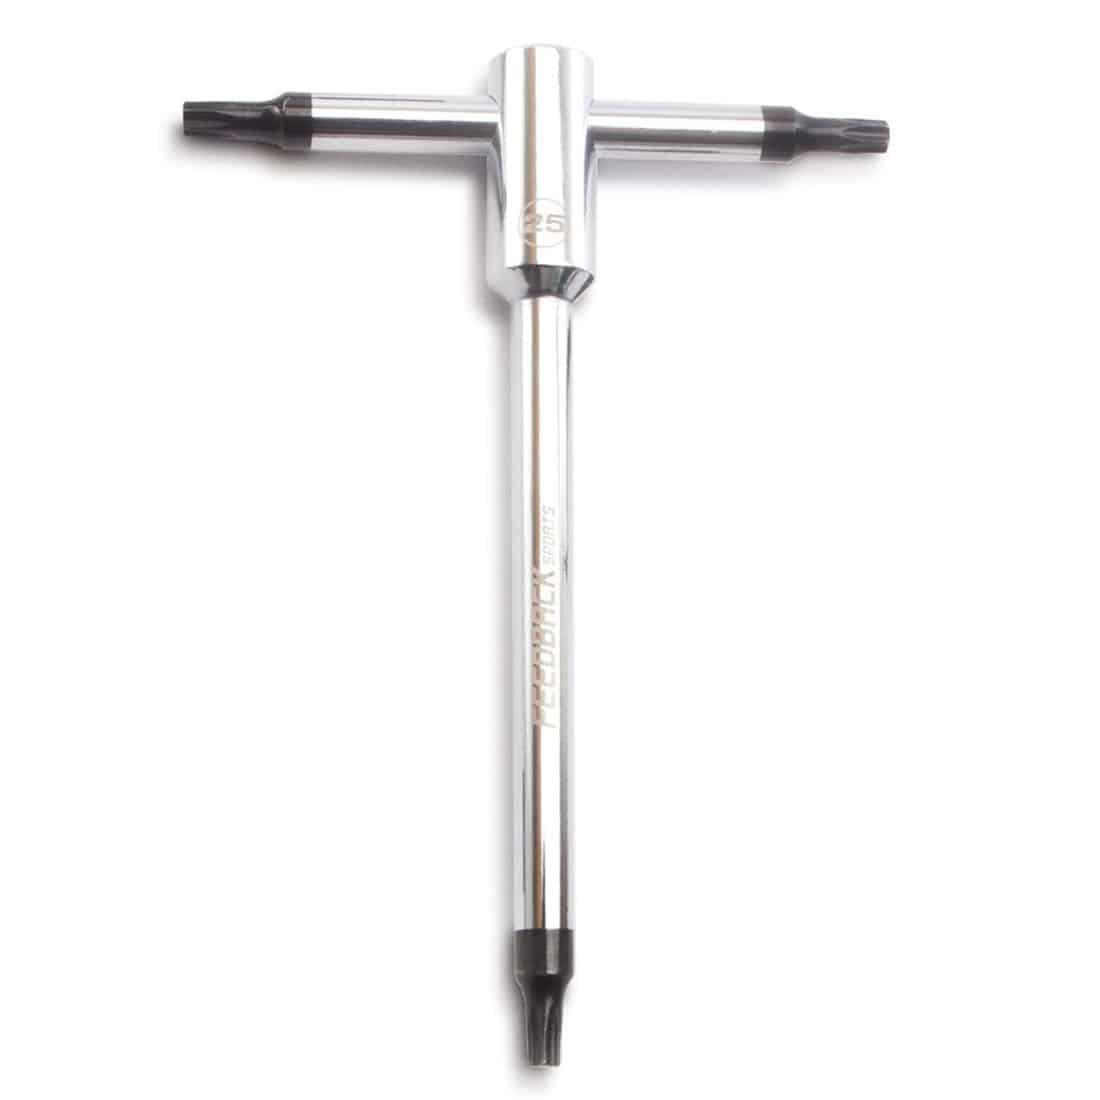 Bicycle t-handle hex wrench on white background.